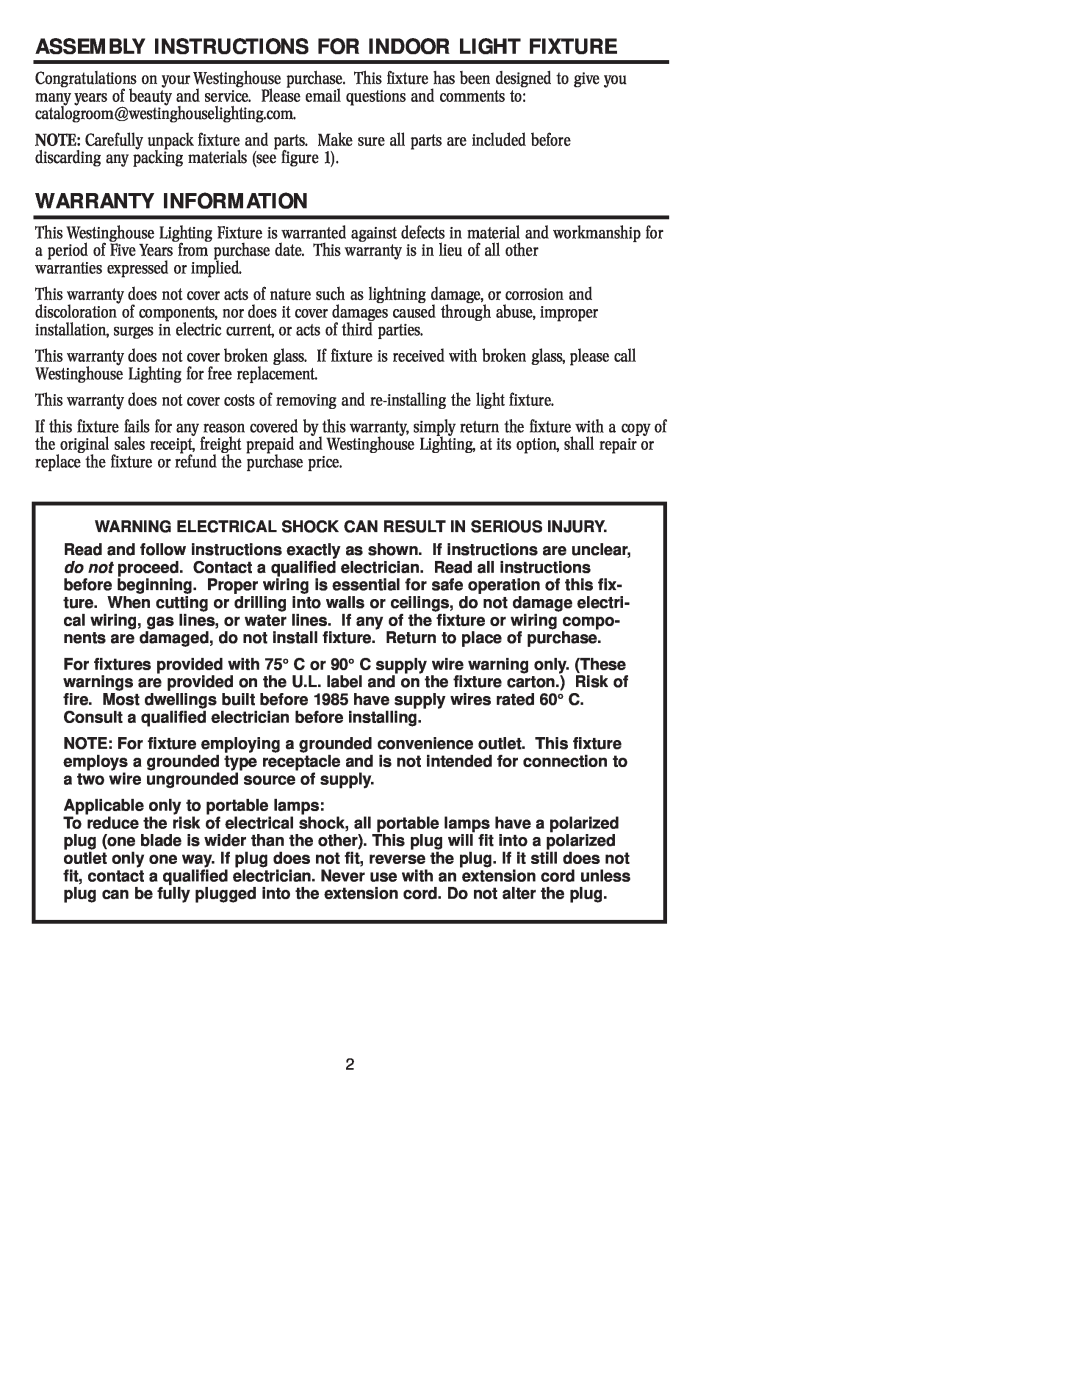 Westinghouse 72404 owner manual Warranty Information, Assembly Instructions For Indoor Light Fixture 